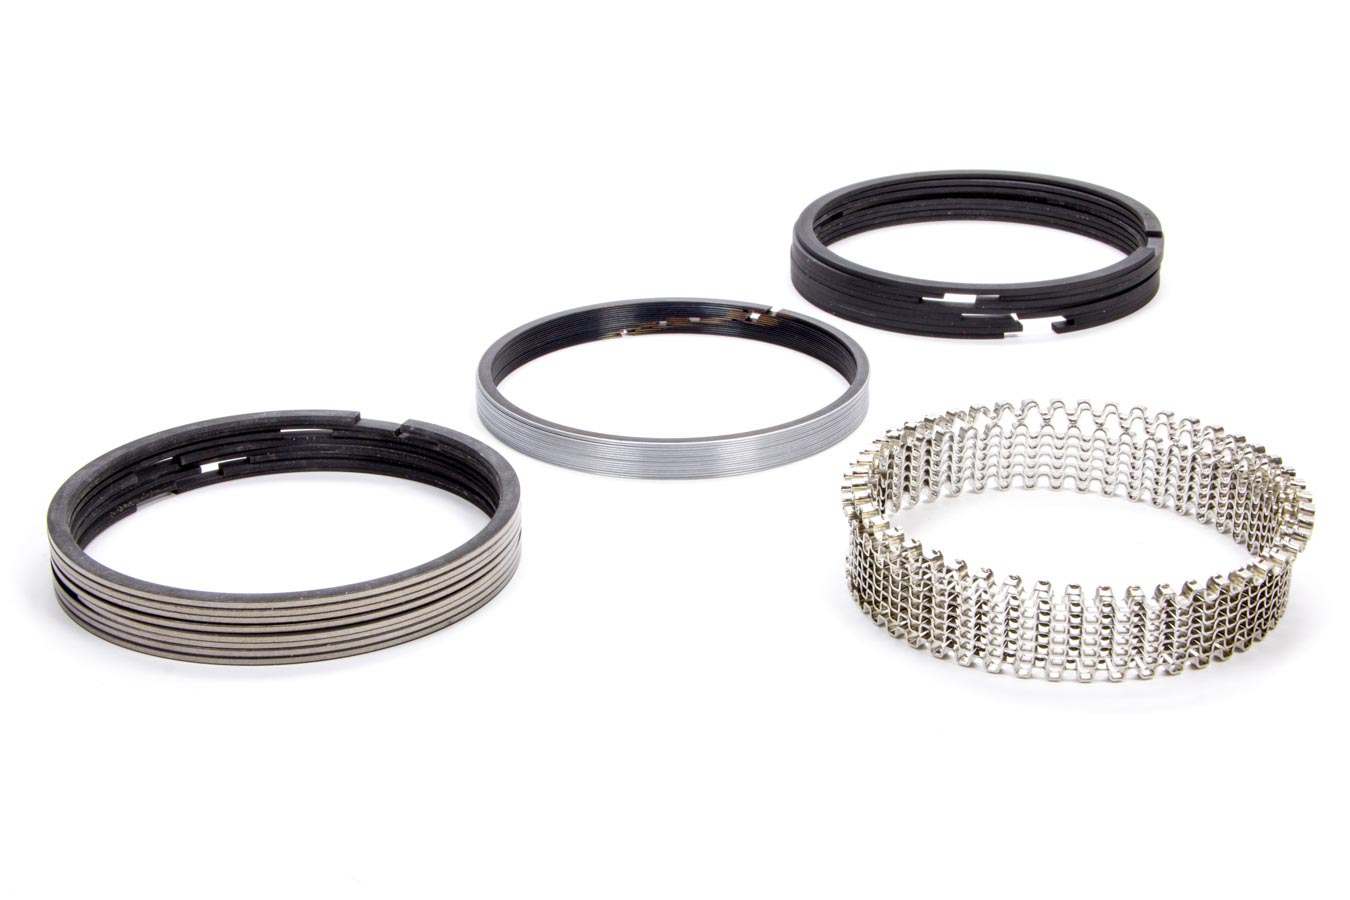 Kit 3.785 in Bore Plasma Moly 1.5 x 1.5 x 3.0 mm Thick Standard Tension 8 Cylinder Piston Rings 